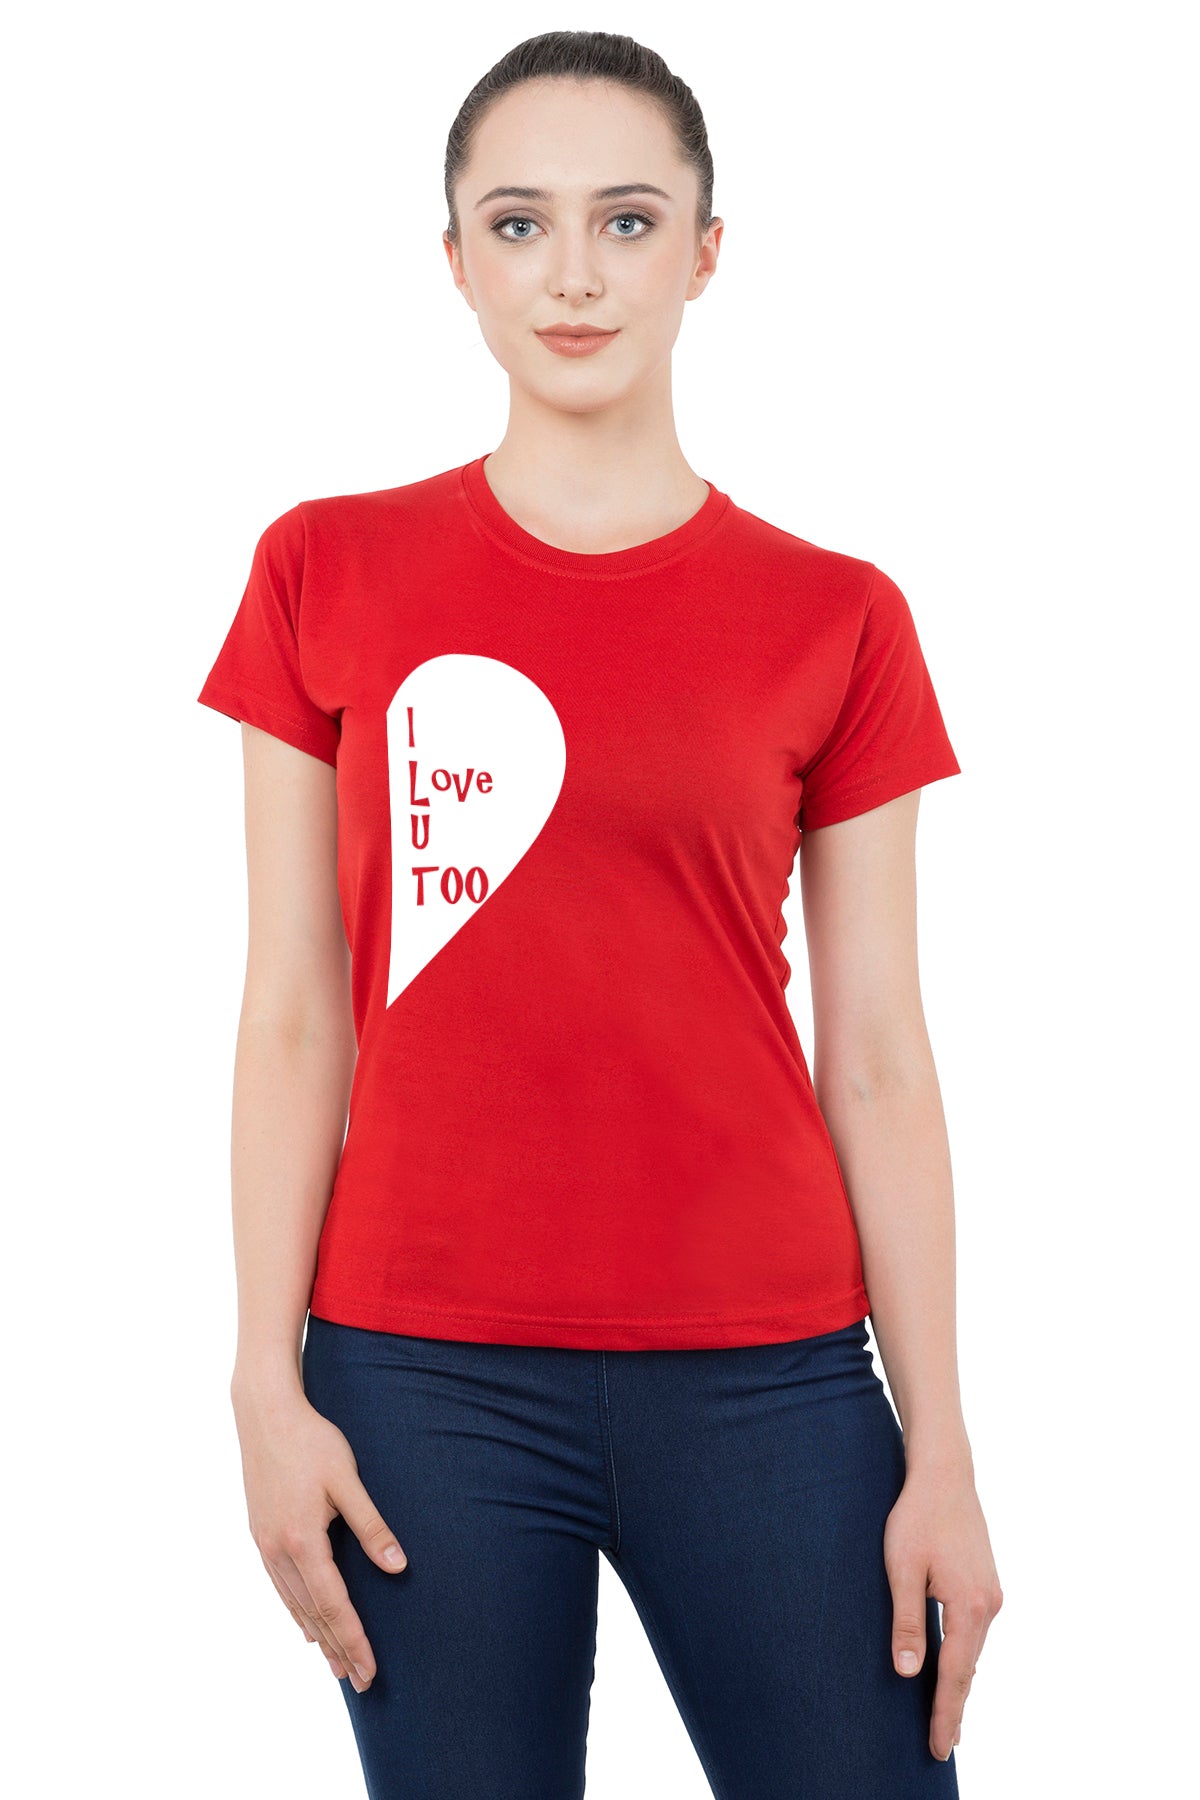 Half Heart matching Couple T shirts- Red